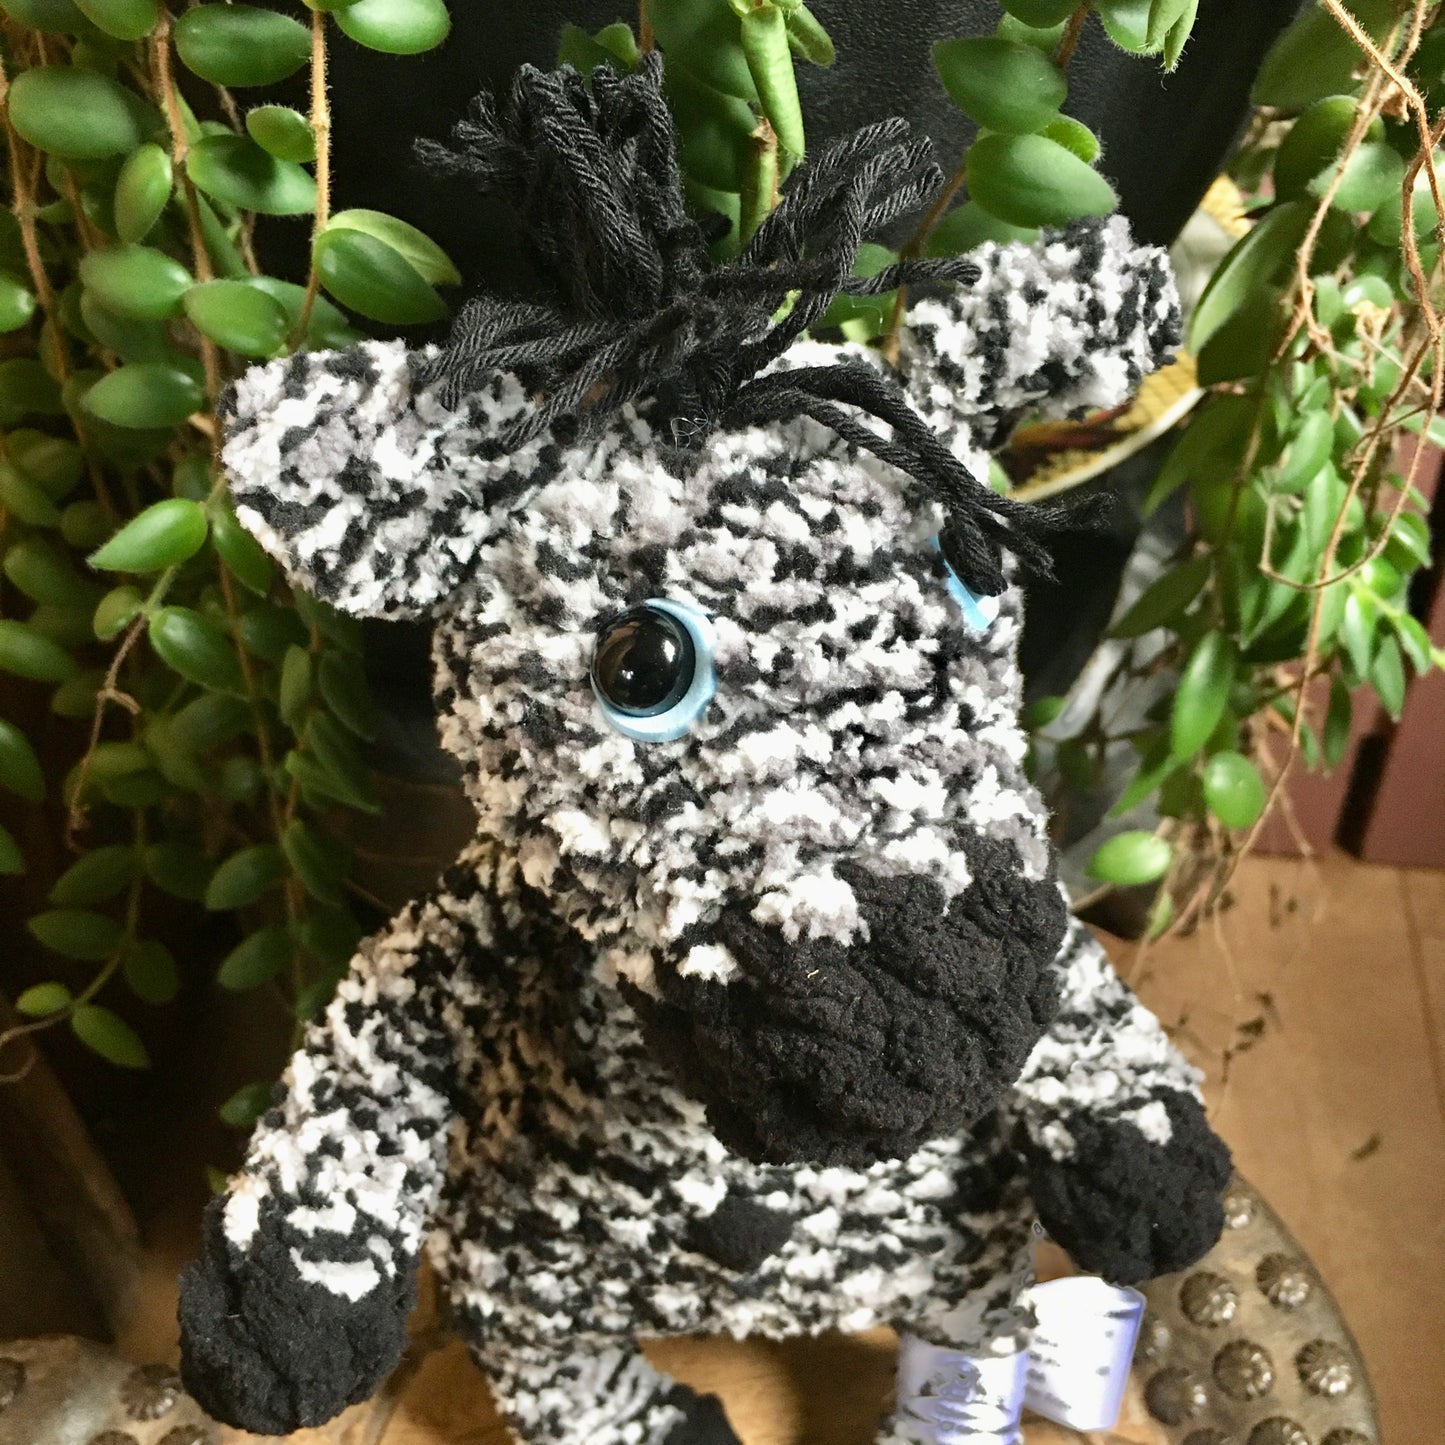 The little zebra with blue eyes, ideal as a birth or birthday gift